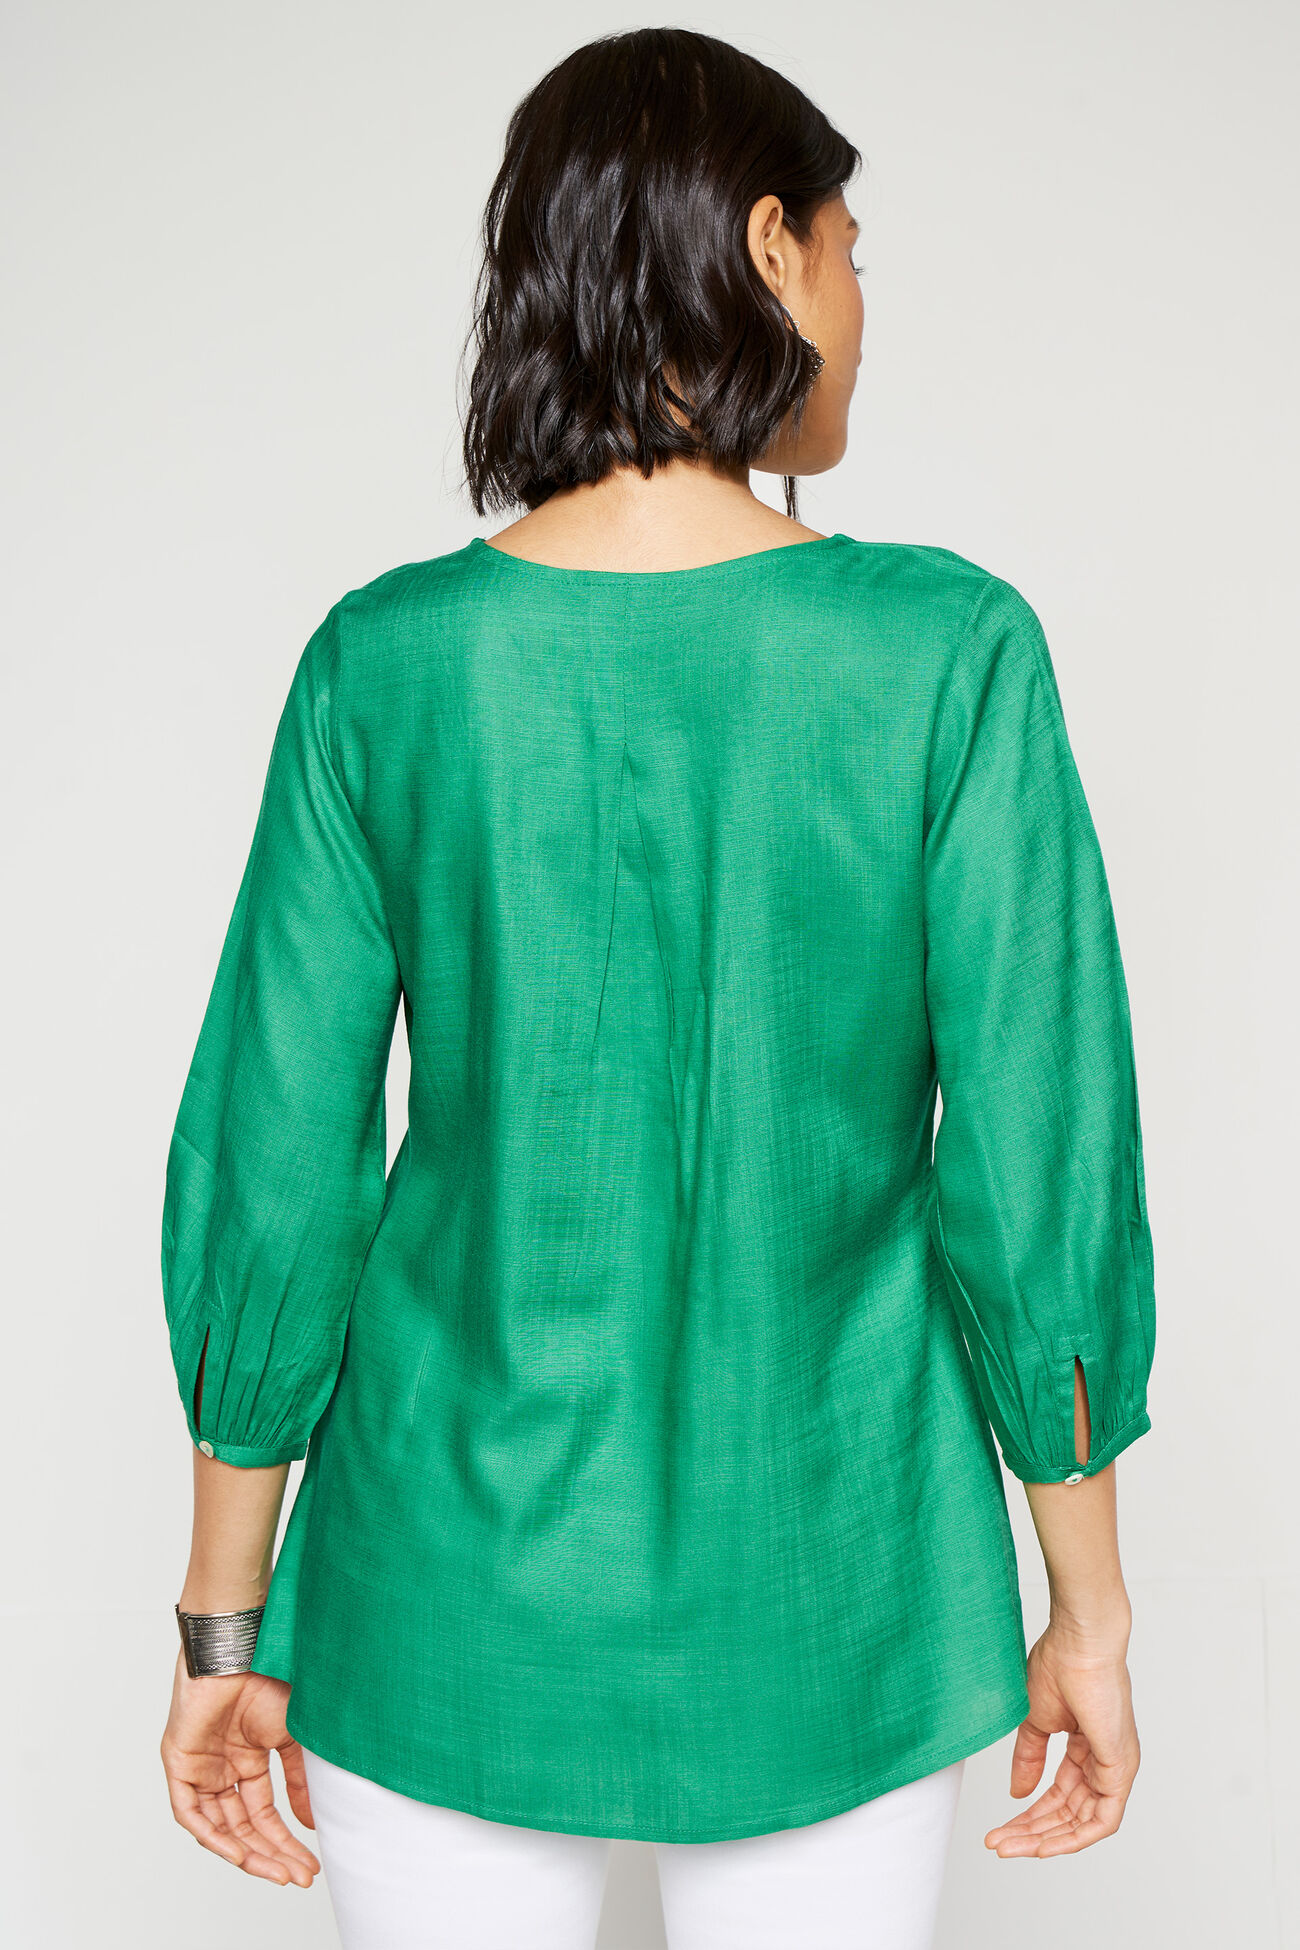 Green Solid Embroidered Straight Top, Green, image 3